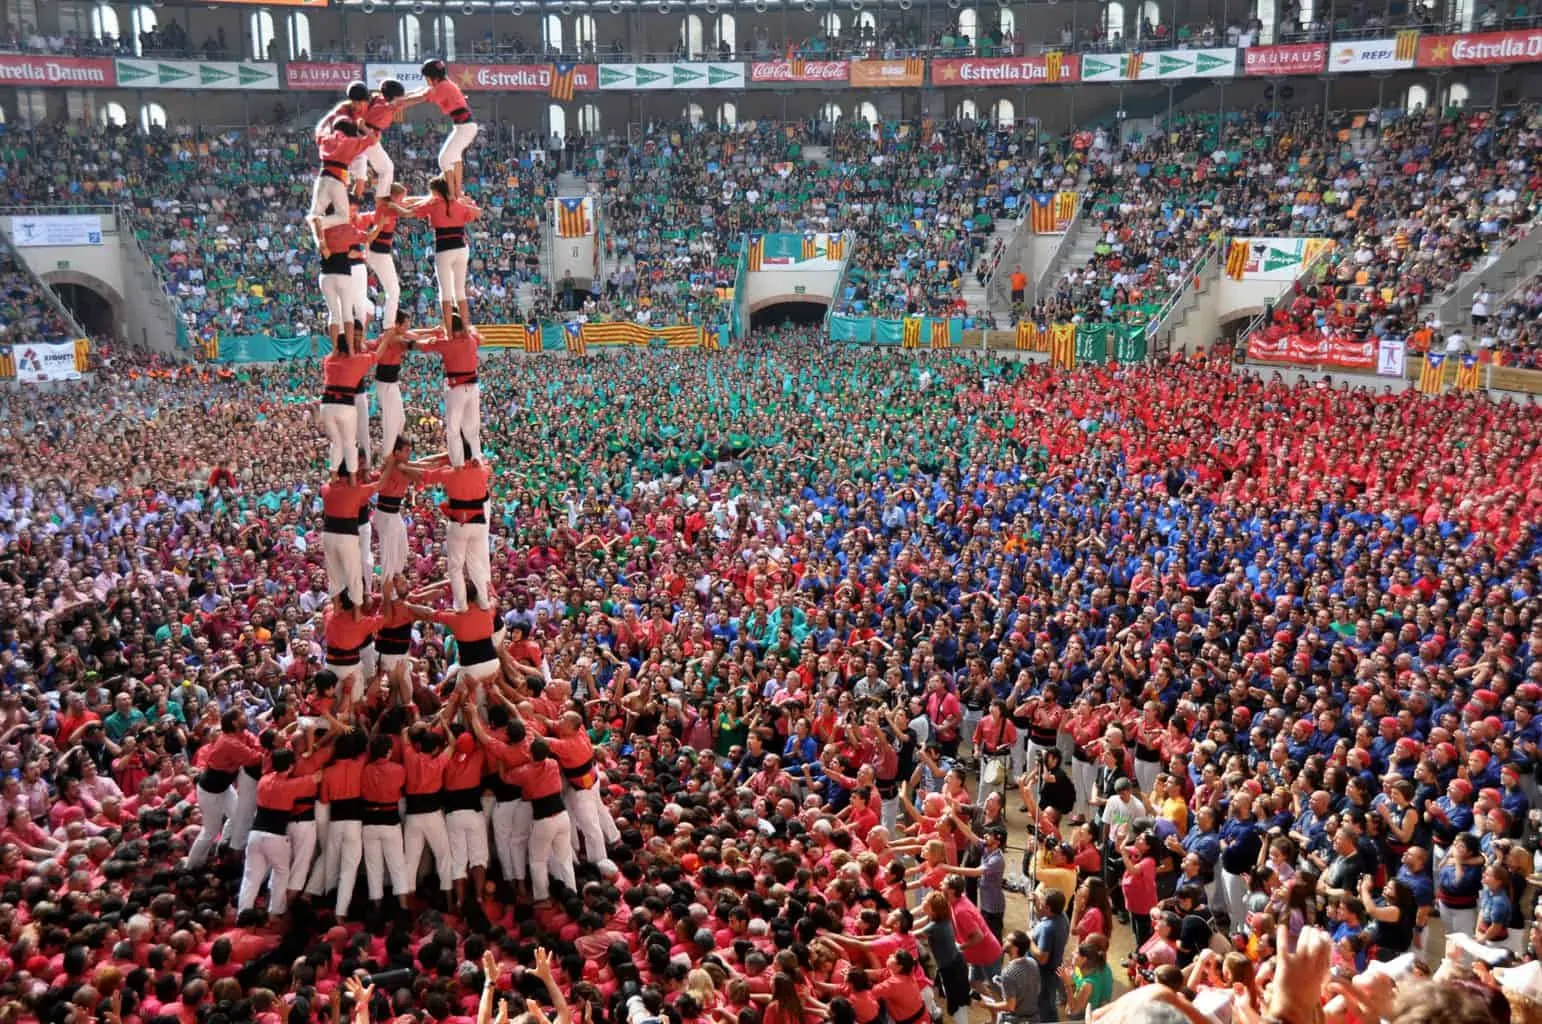 If you're in Barcelona over the summer, you'll see these Castellers, or human towers, pop on during the weekends. 